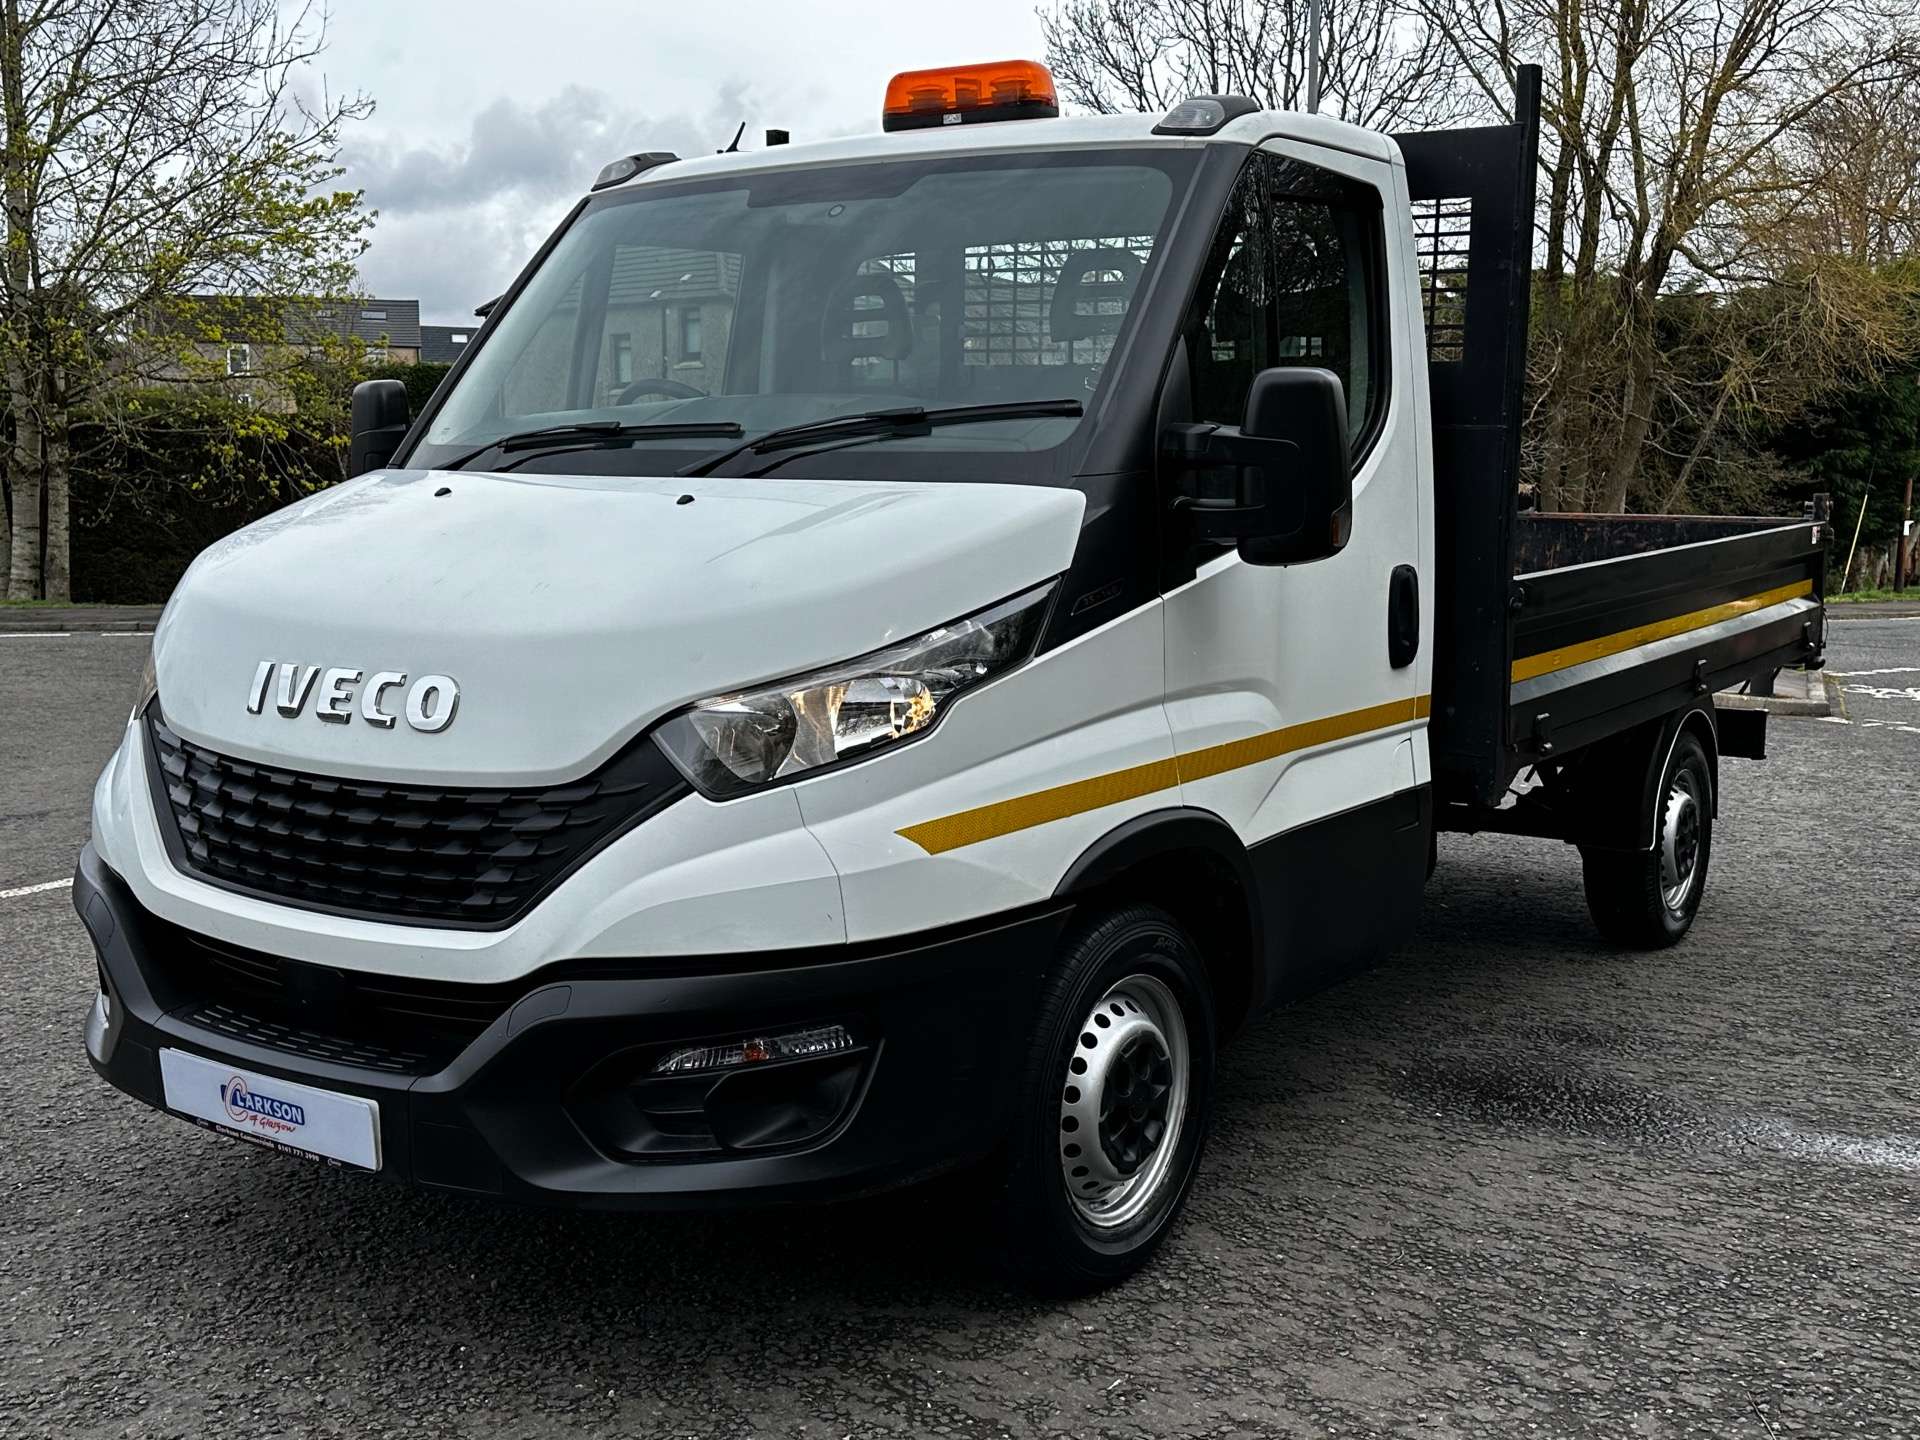 IVECO DAILY 35C CLASS 35C14 Single Cab Tipper 140ps/6 speed #4